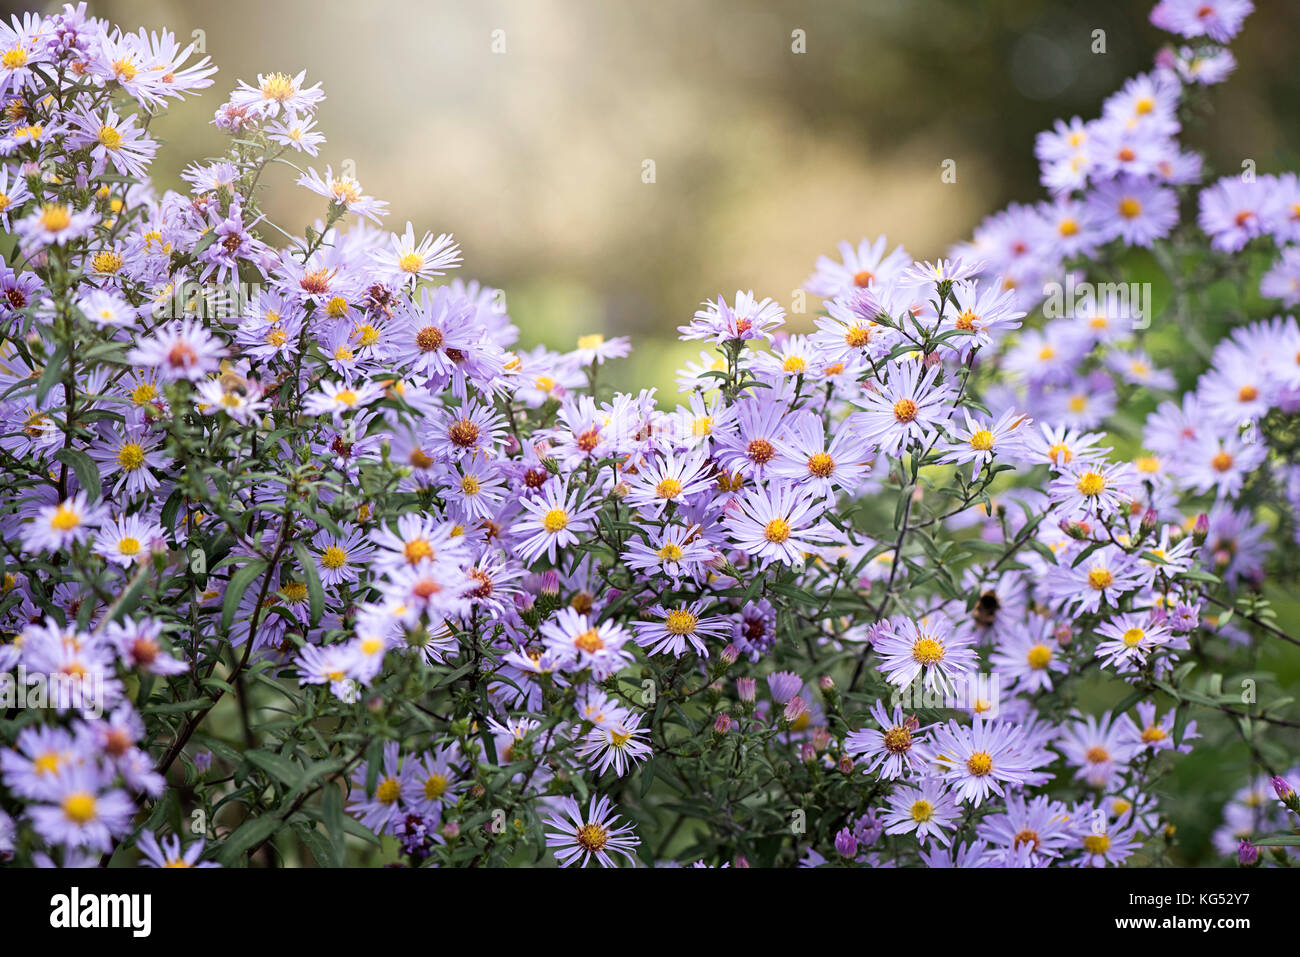 Close-up image of Autumn flowering, purple Aster flowers also known as Michaelmas daisies Stock Photo